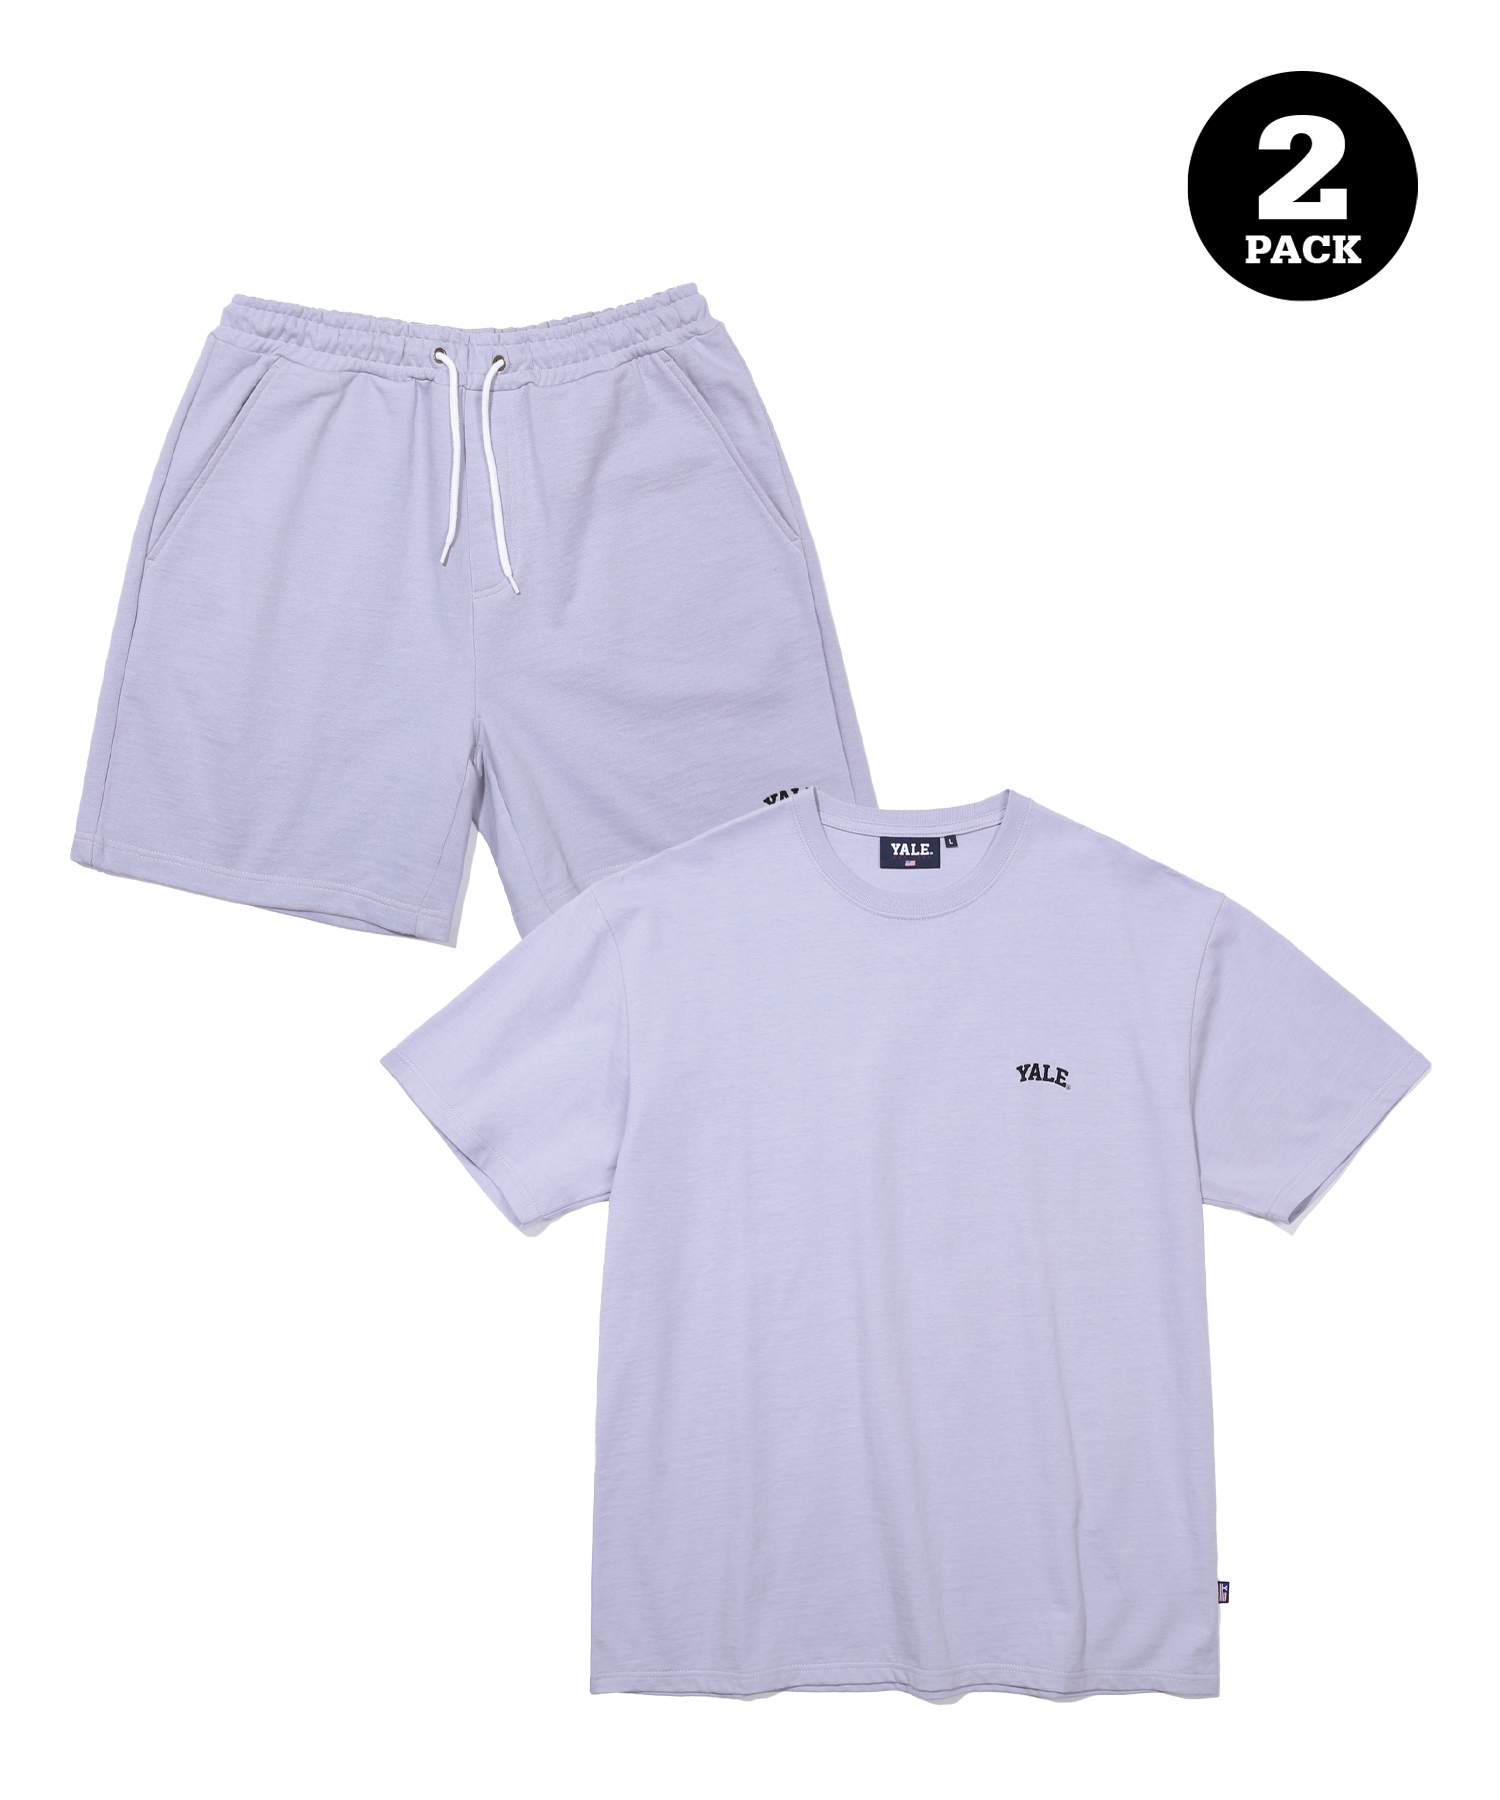 [LOUNGE WEAR] SMALL ARCH TEE + SHORTS SET LAVENDER